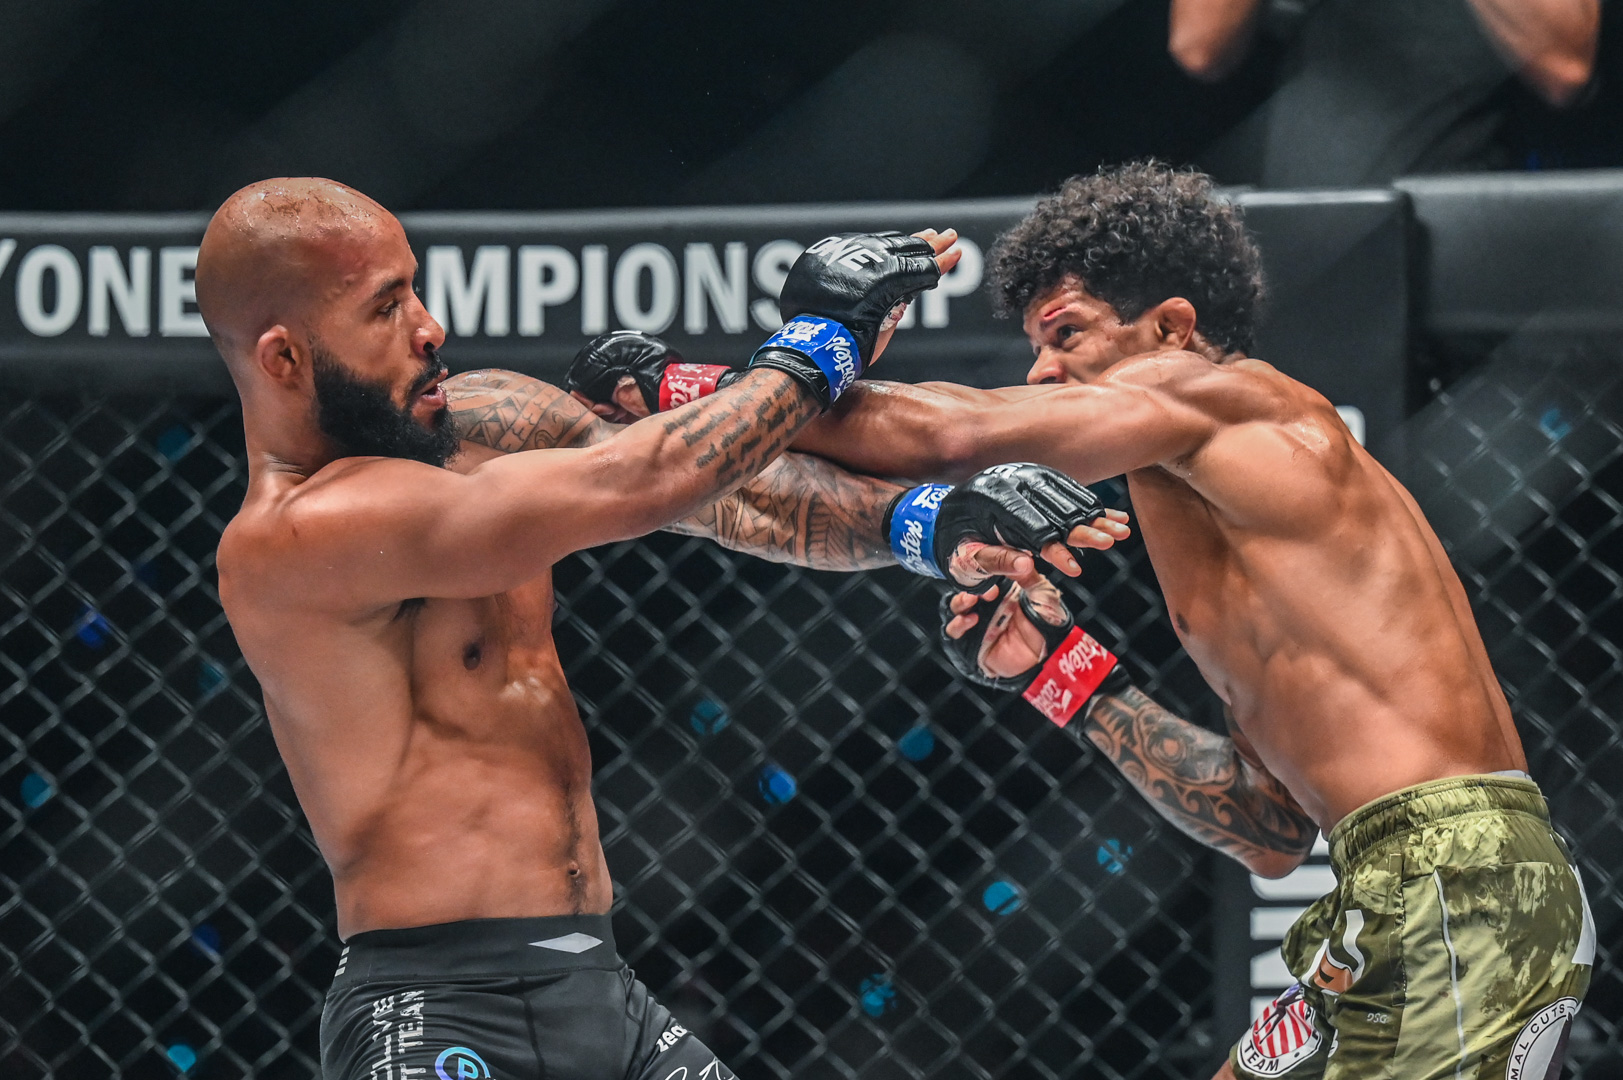 Demetrious Johnson exchanges strikes with Adriano Moraes at ONE on Prime Video 1